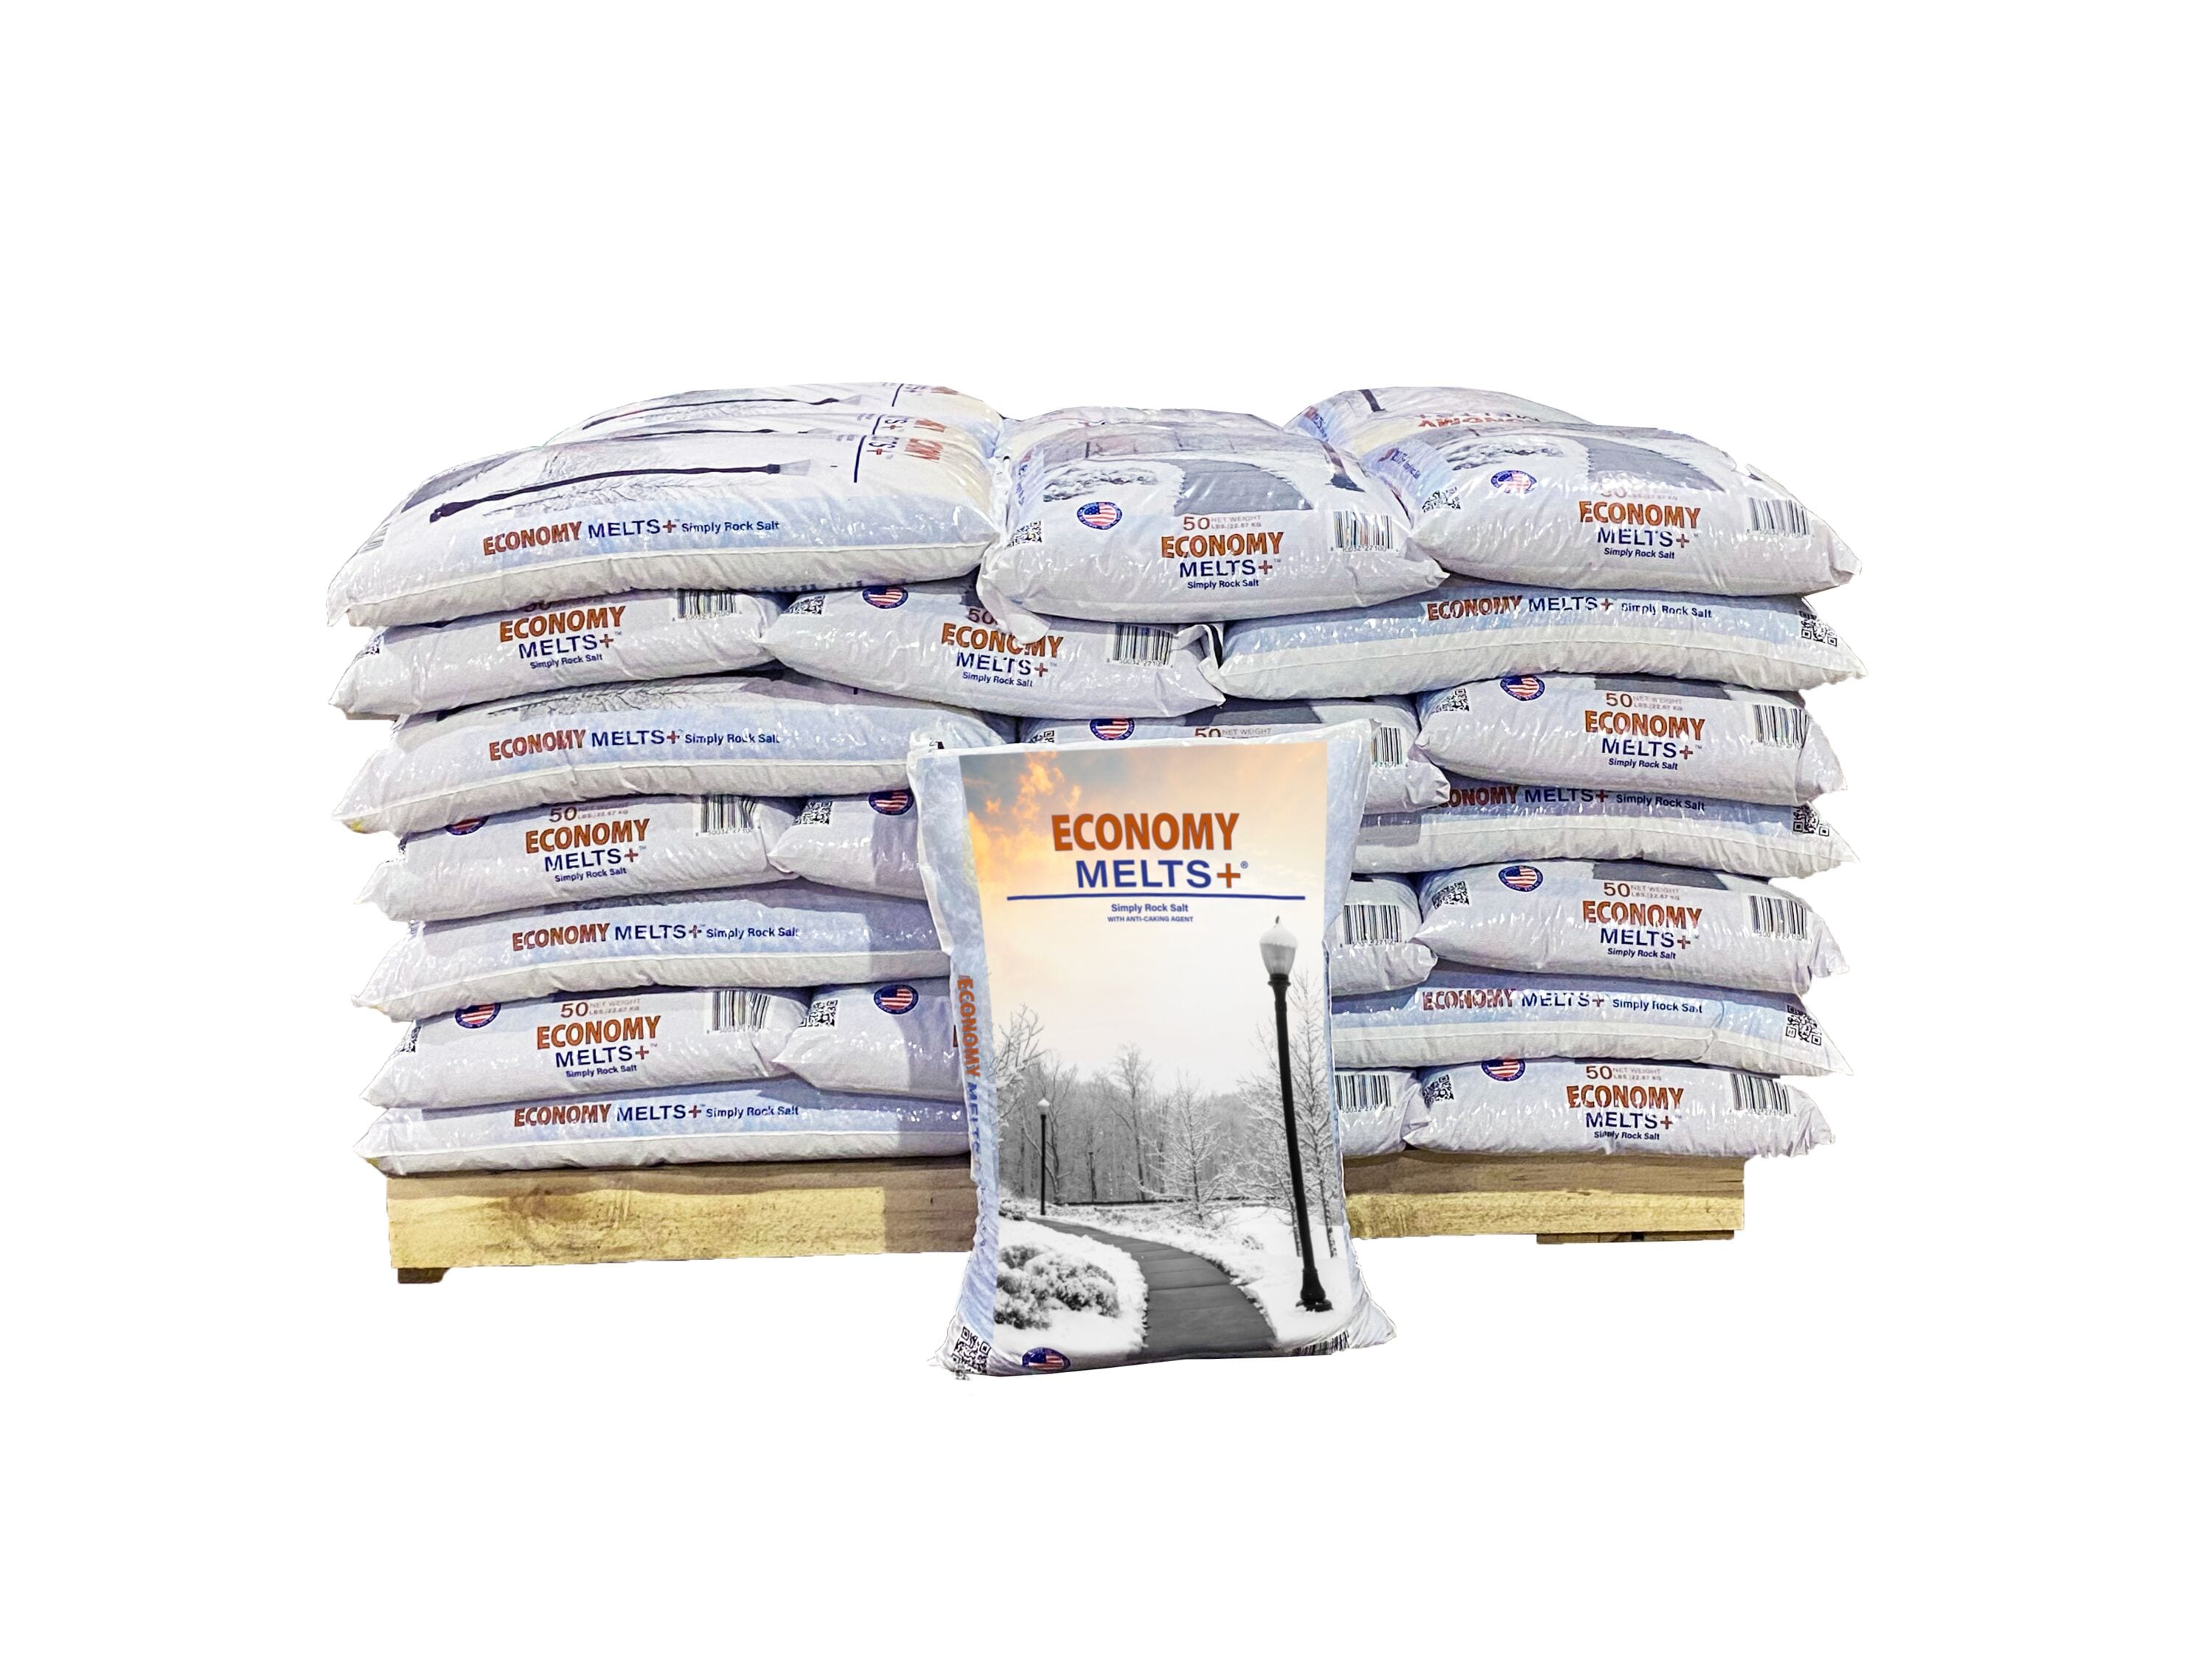 Ice Melt Salt Products - Circle B Inc Has All Your Winter Needs Covered!